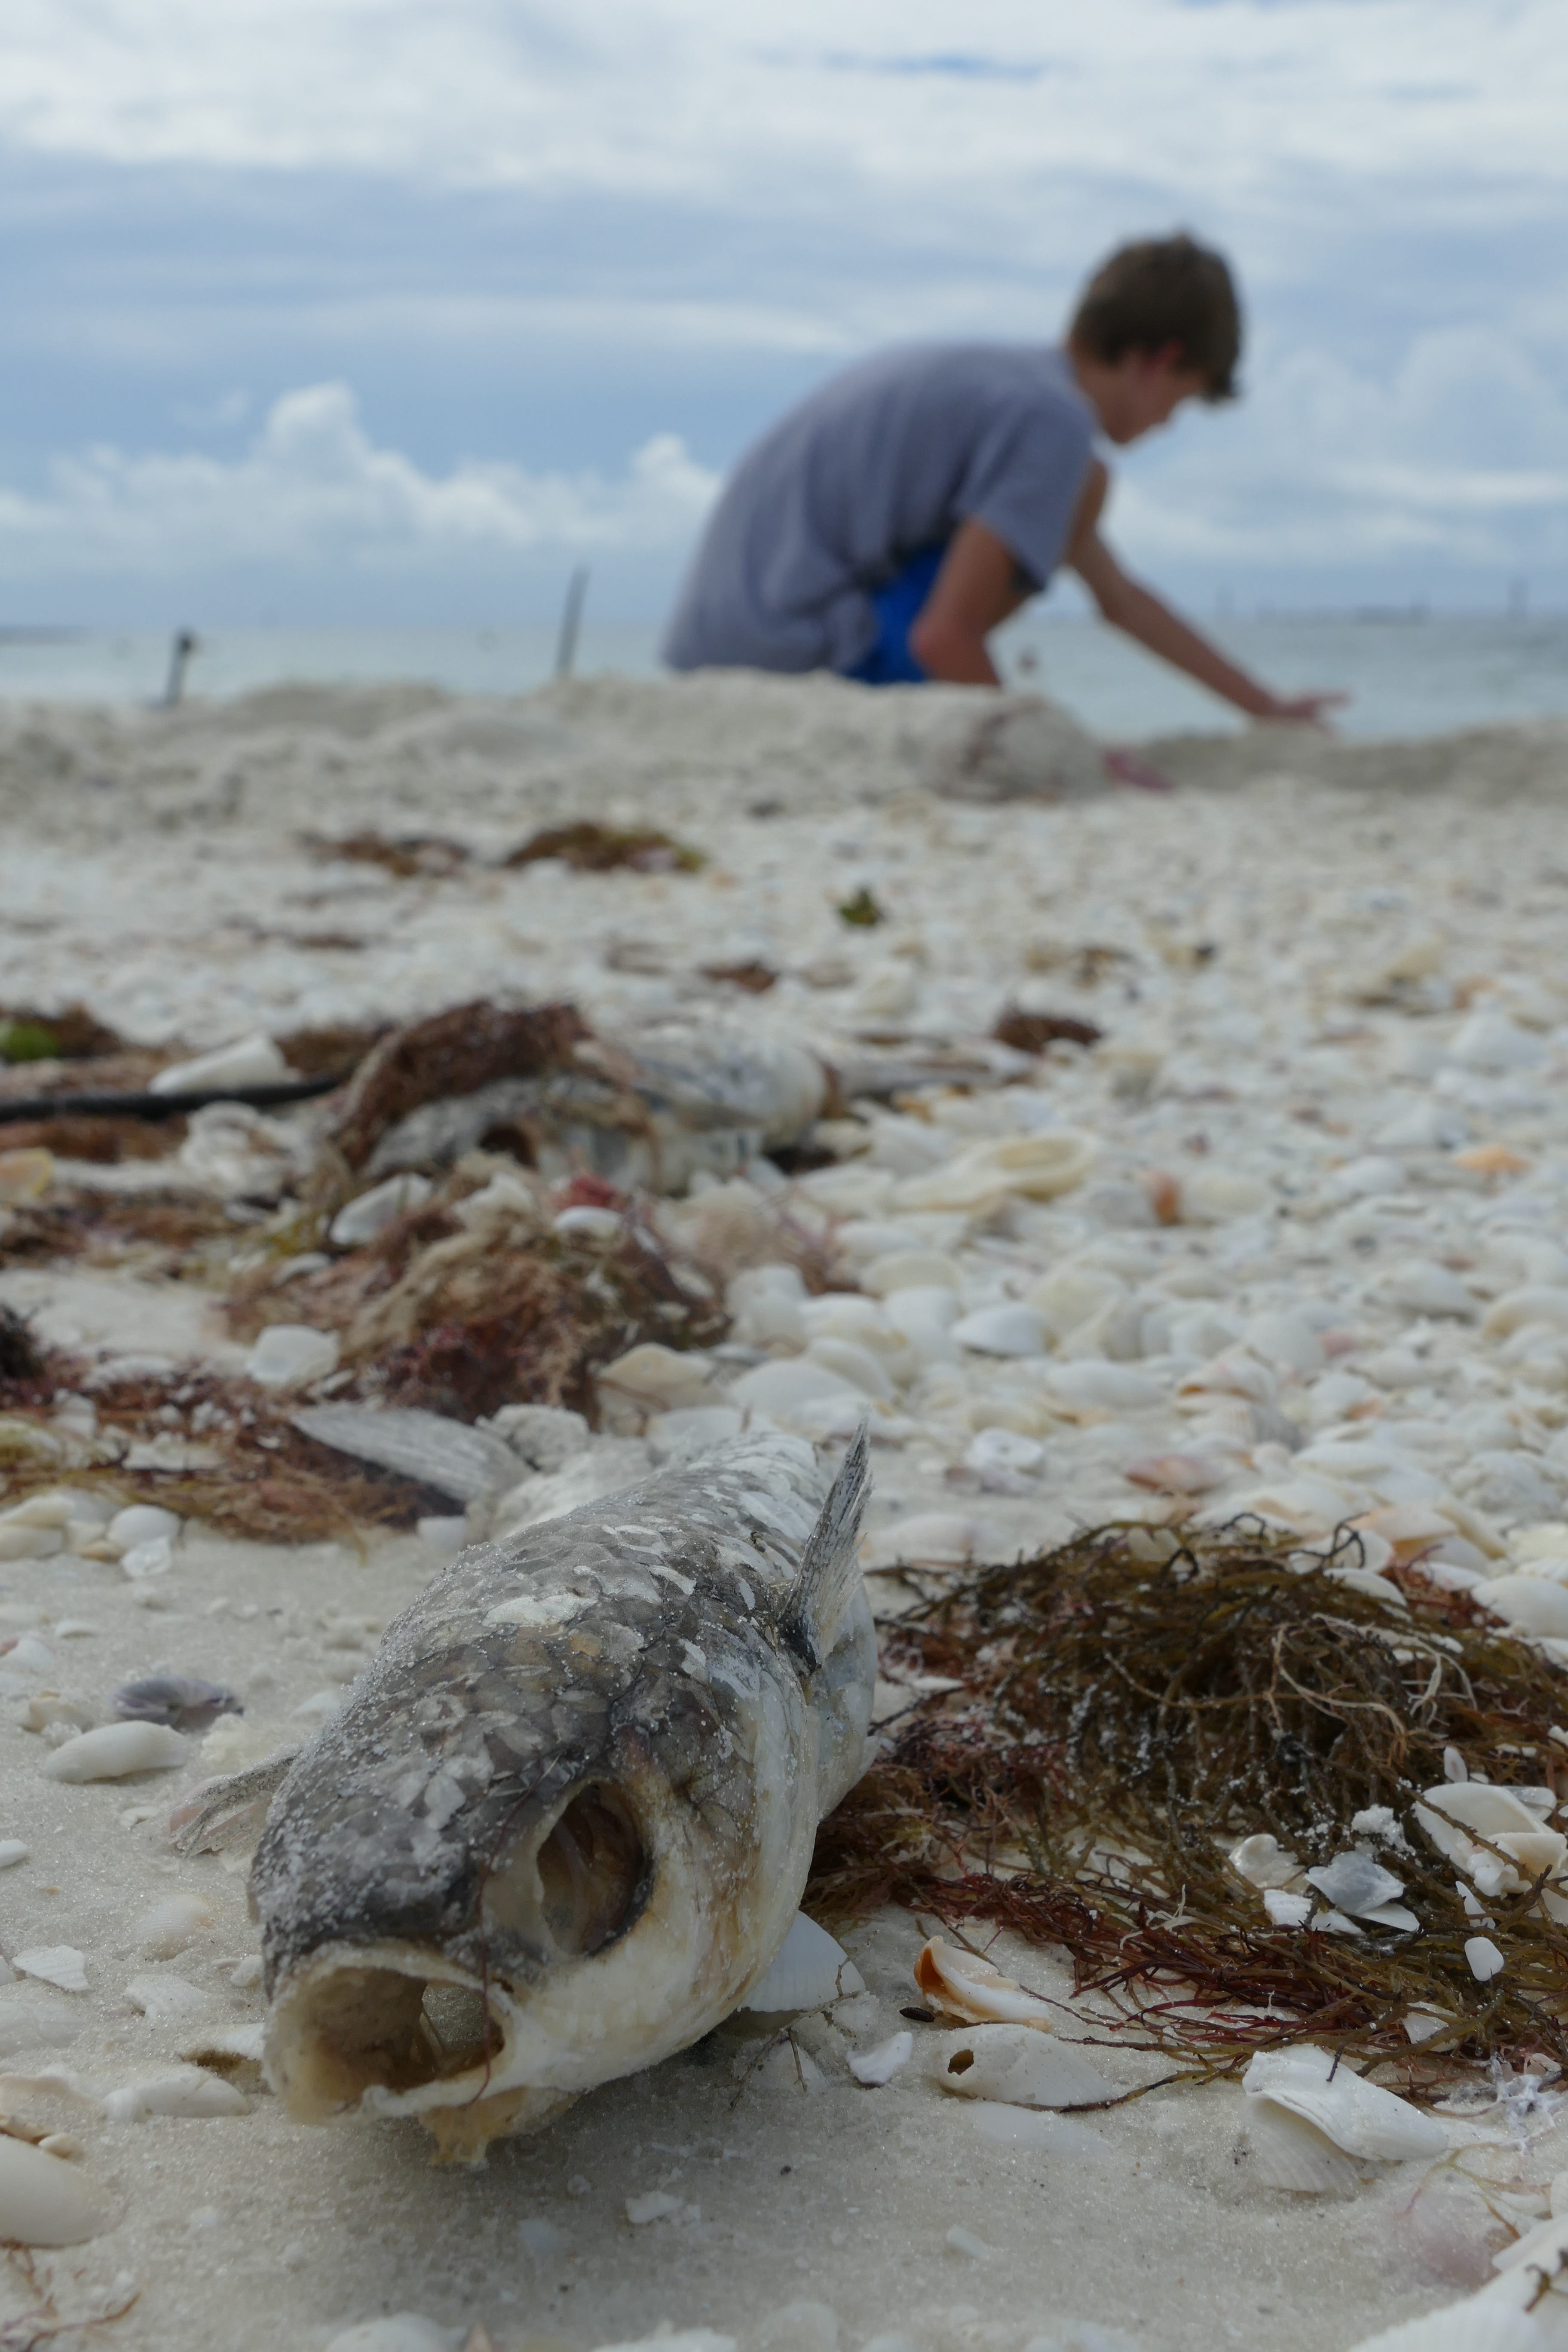 A young man plays with sand on South Beach, Marco Island, on Oct. 9. A few feet away from him, a dead fish rots. Dozens of dead fish washed ashore Wednesday on Marco Island as government agencies alerted of high levels of the organism that causes the red tide.